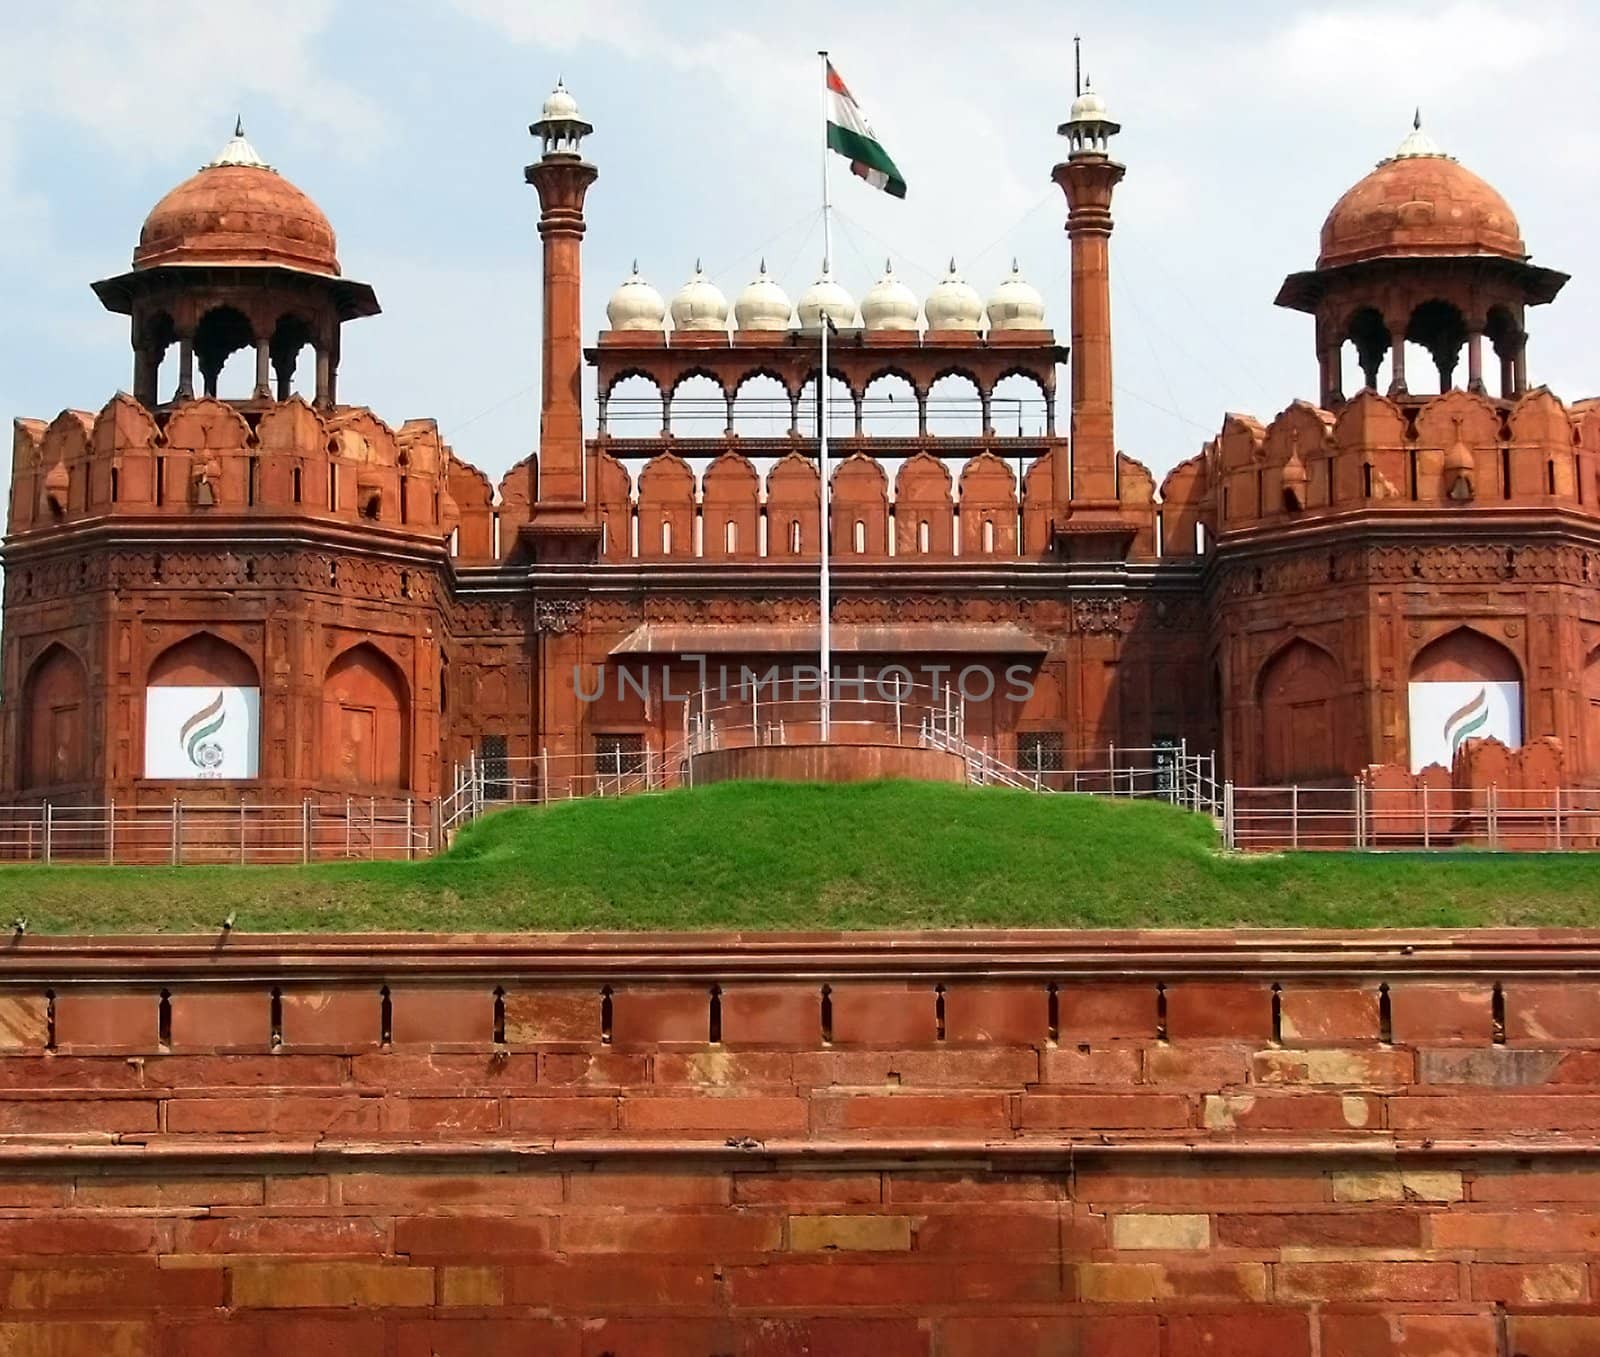 View of the Red Fort front wall in New Delhi, India. Built in the 1600's by Mughal Emperor Shah Jahan.